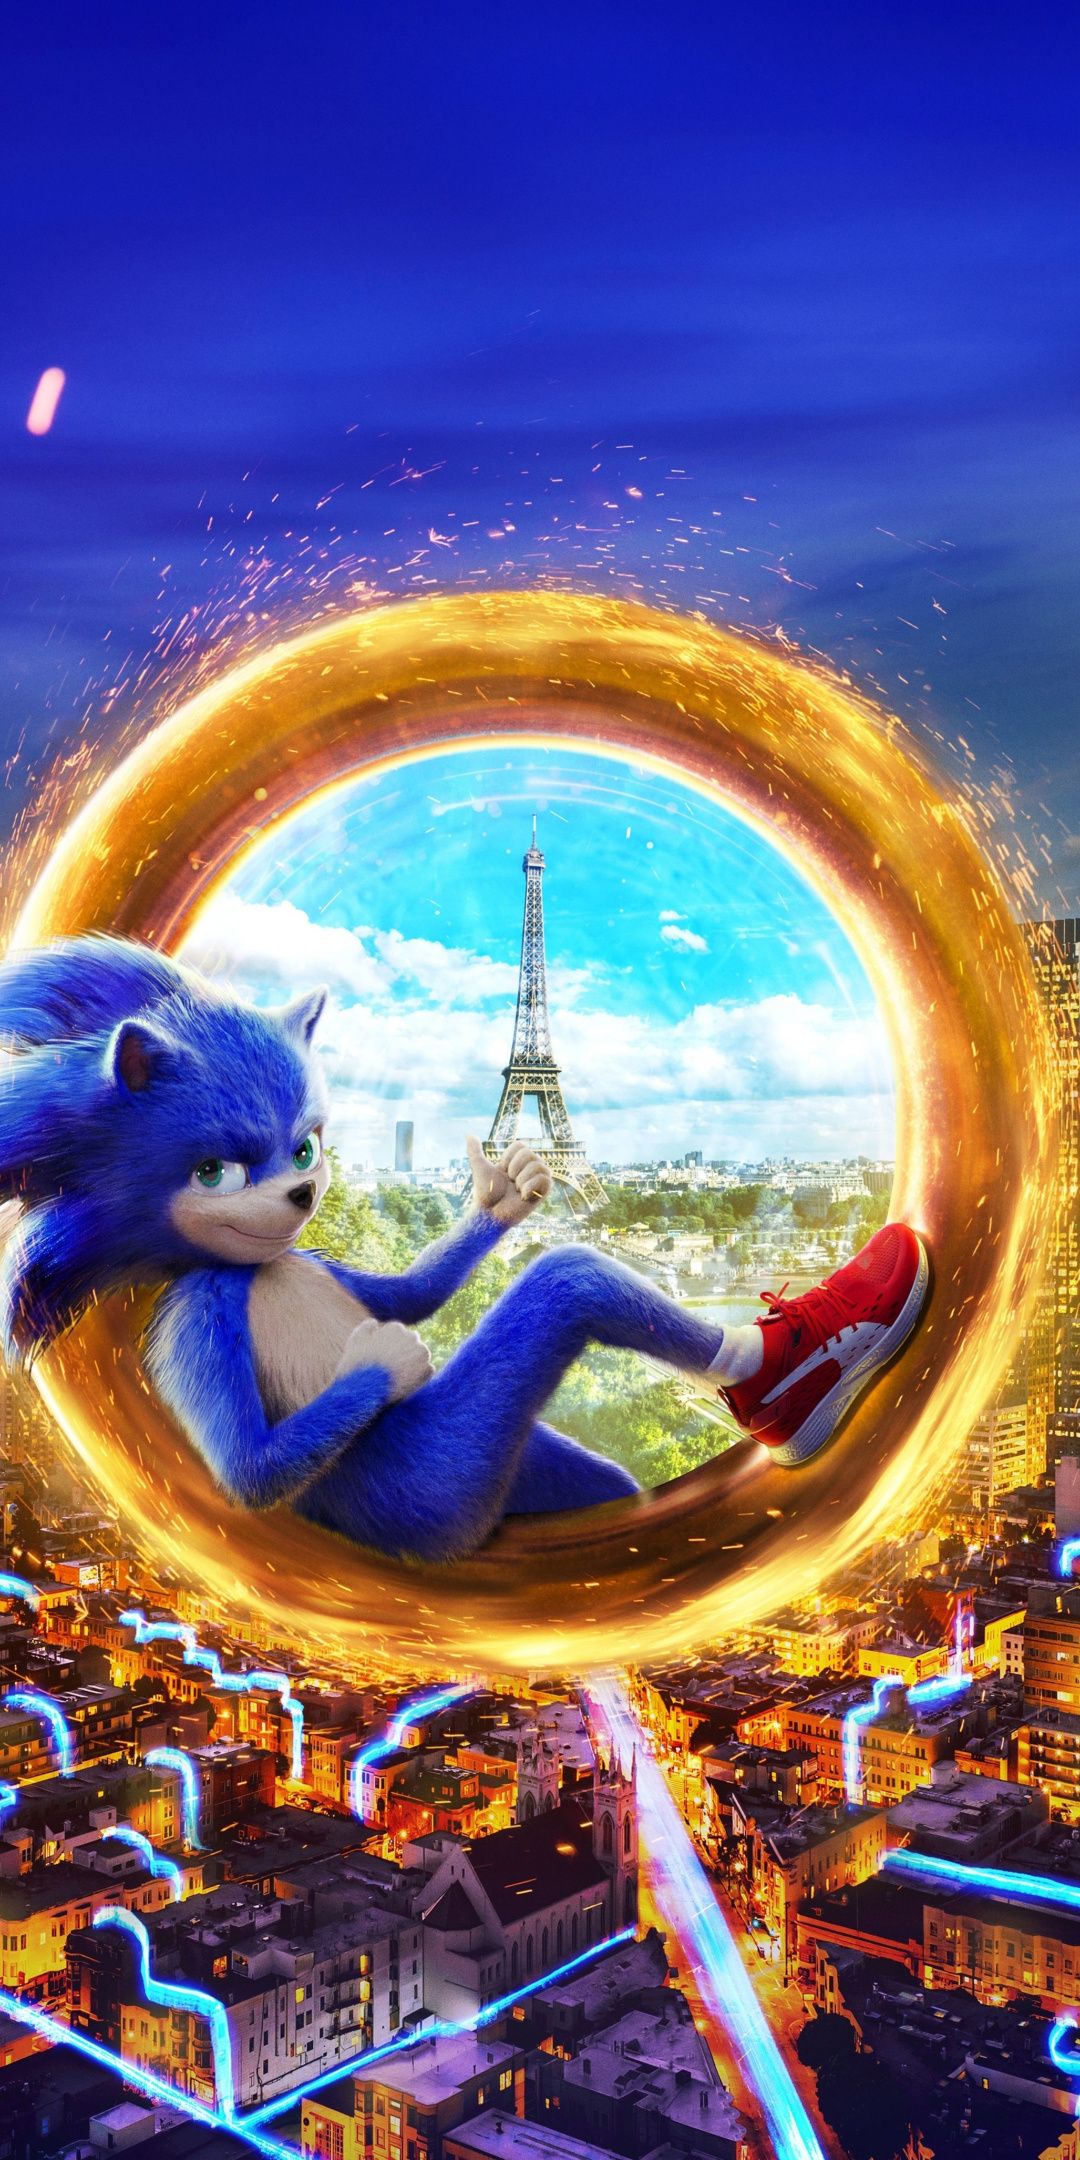 Sonic The Hedgehog 2019 Movie Poster Wallpapers